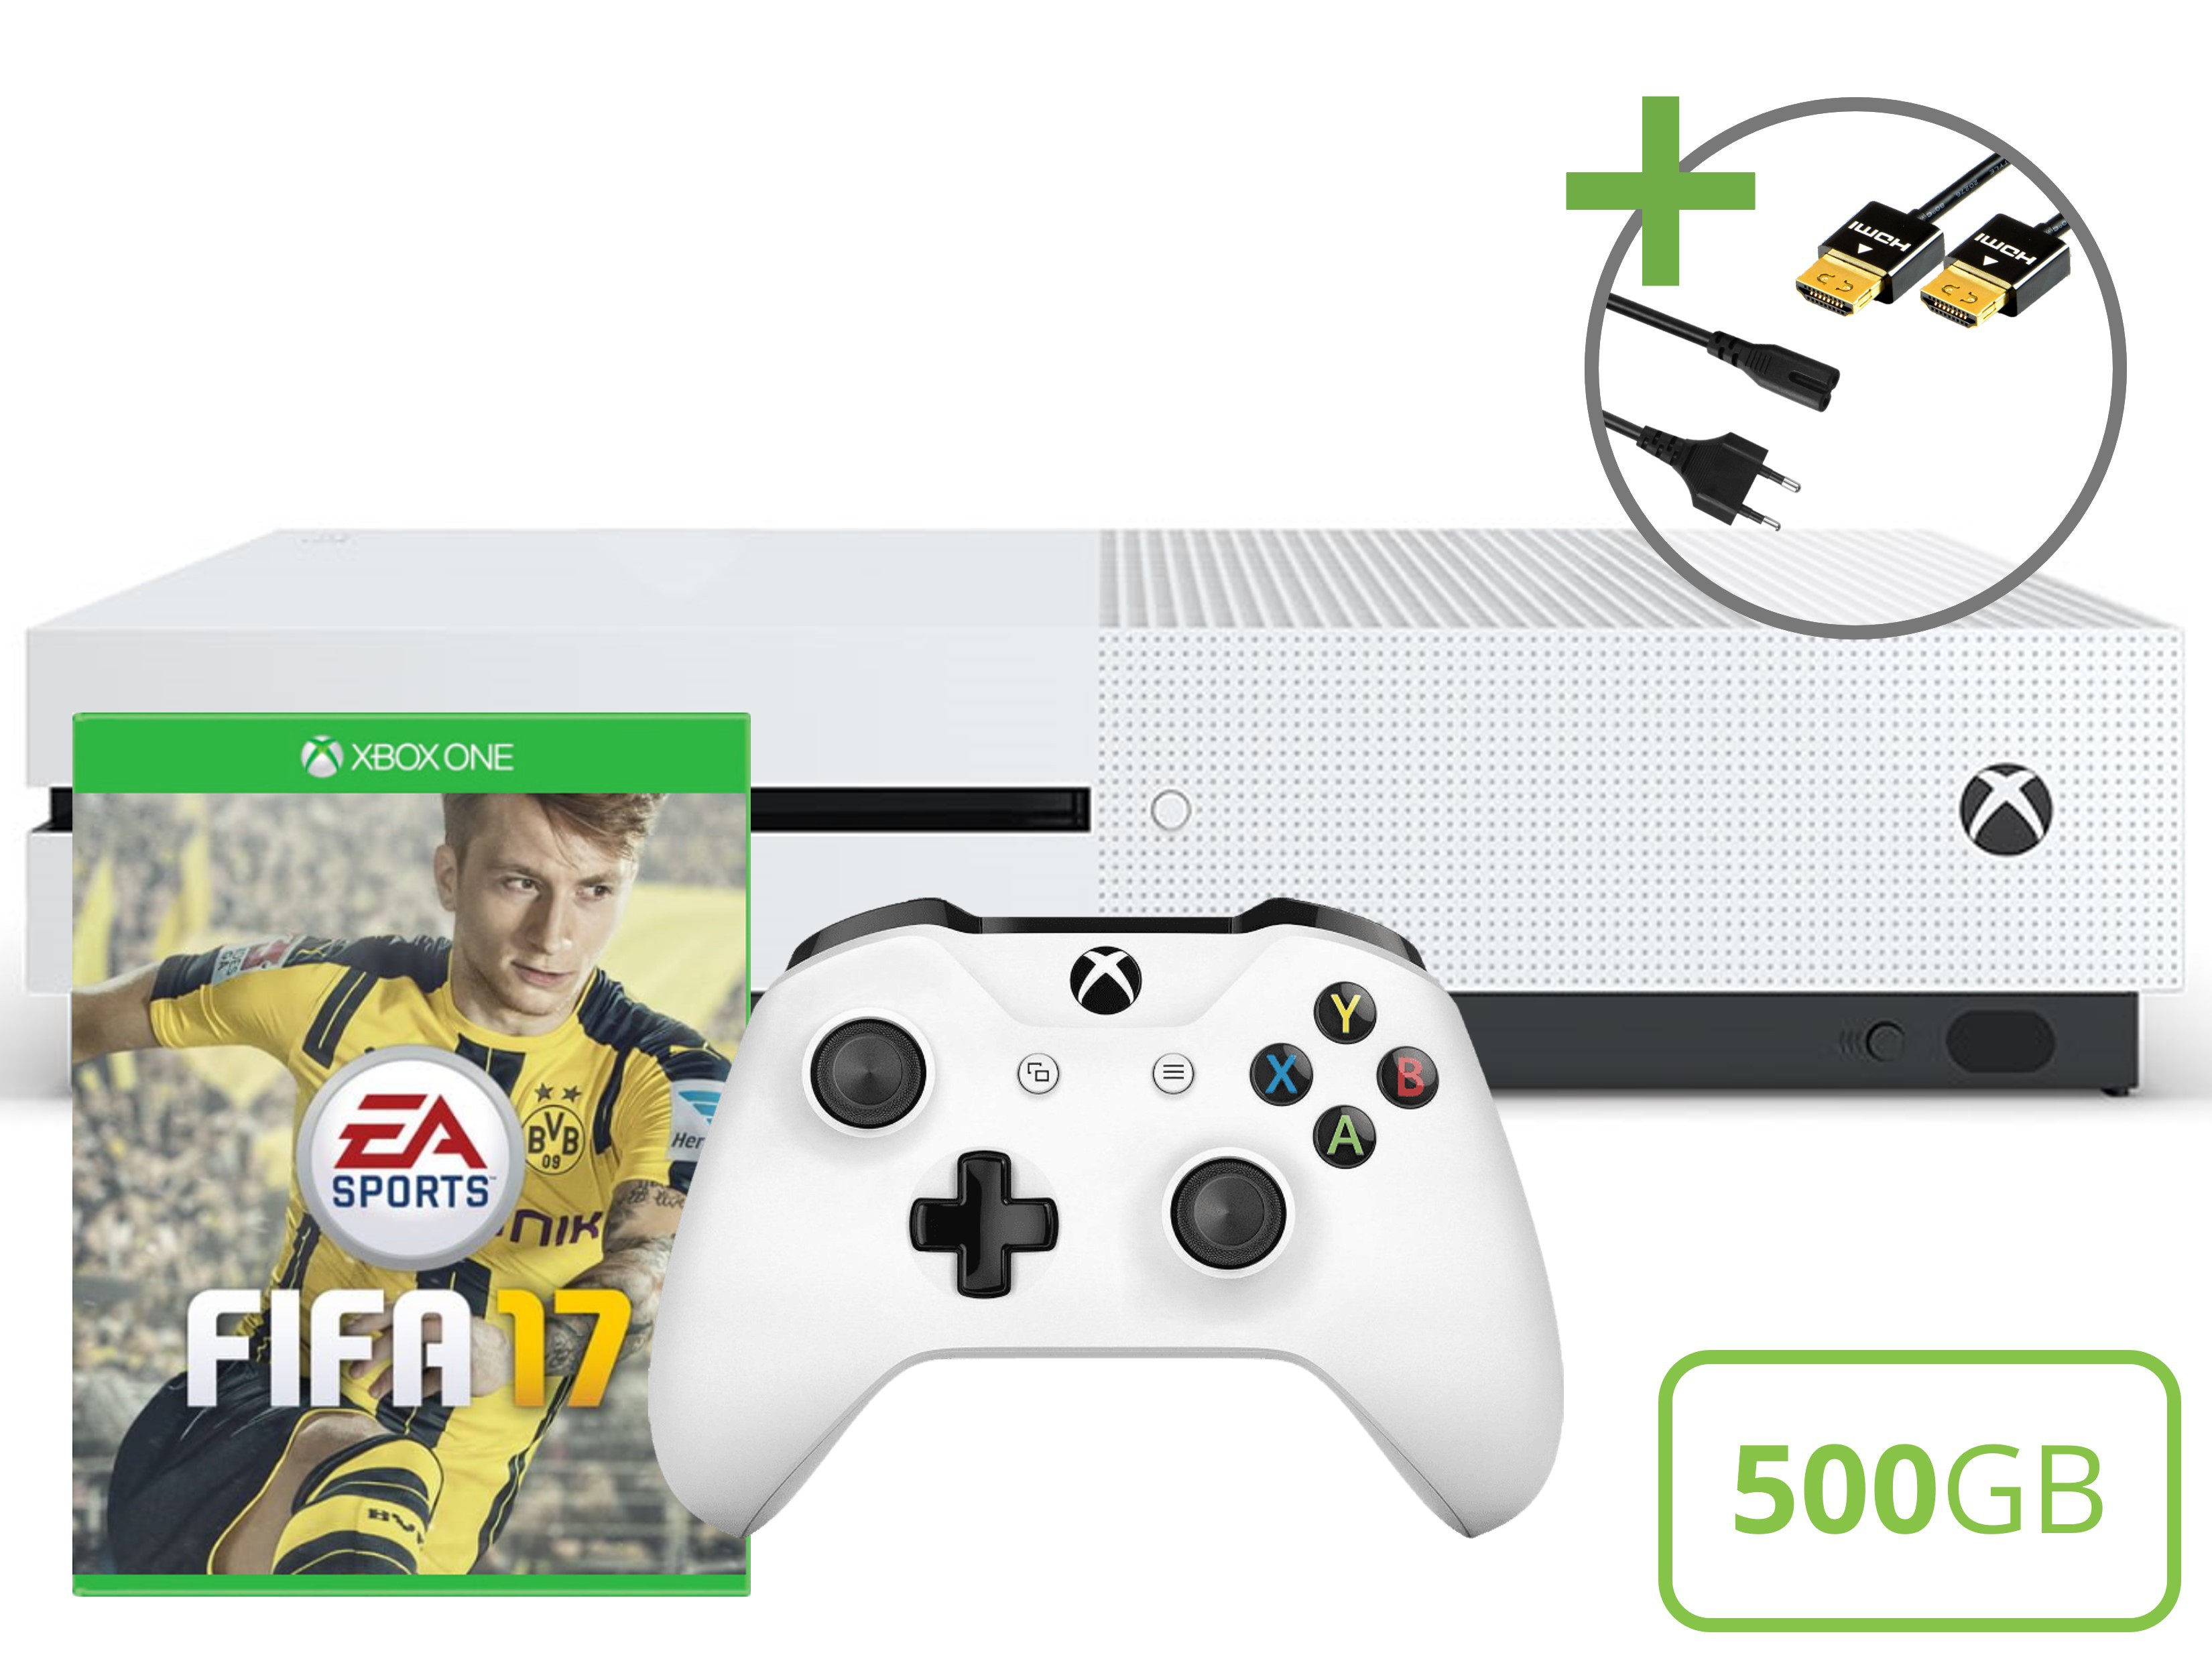 Microsoft Xbox One S Starter Pack - 500GB FIFA 17 Edition - Xbox One Hardware